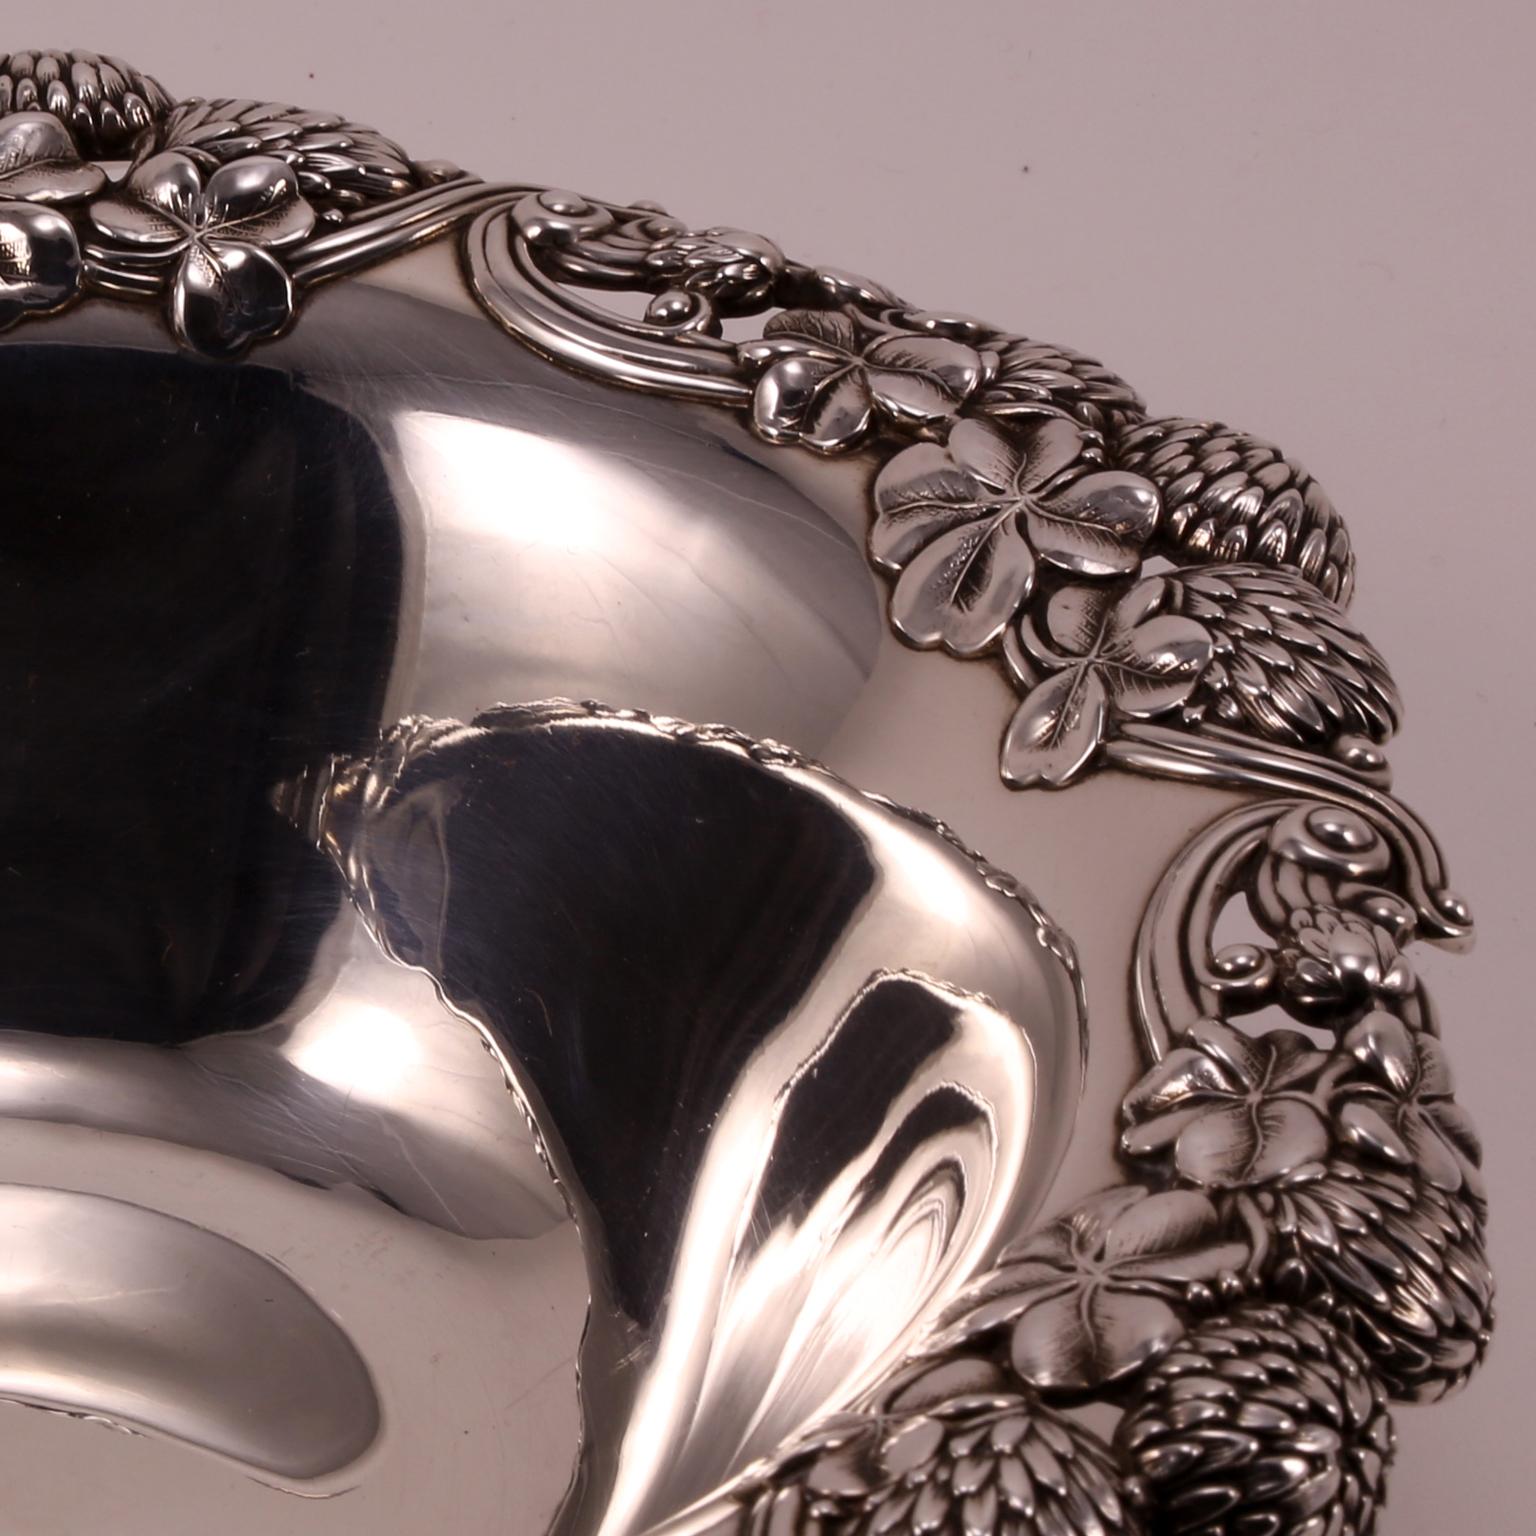 19th Century Tiffany Sterling Silver Bowl Decorated with Flowers and Leaves im Zustand „Gut“ im Angebot in Florence, IT